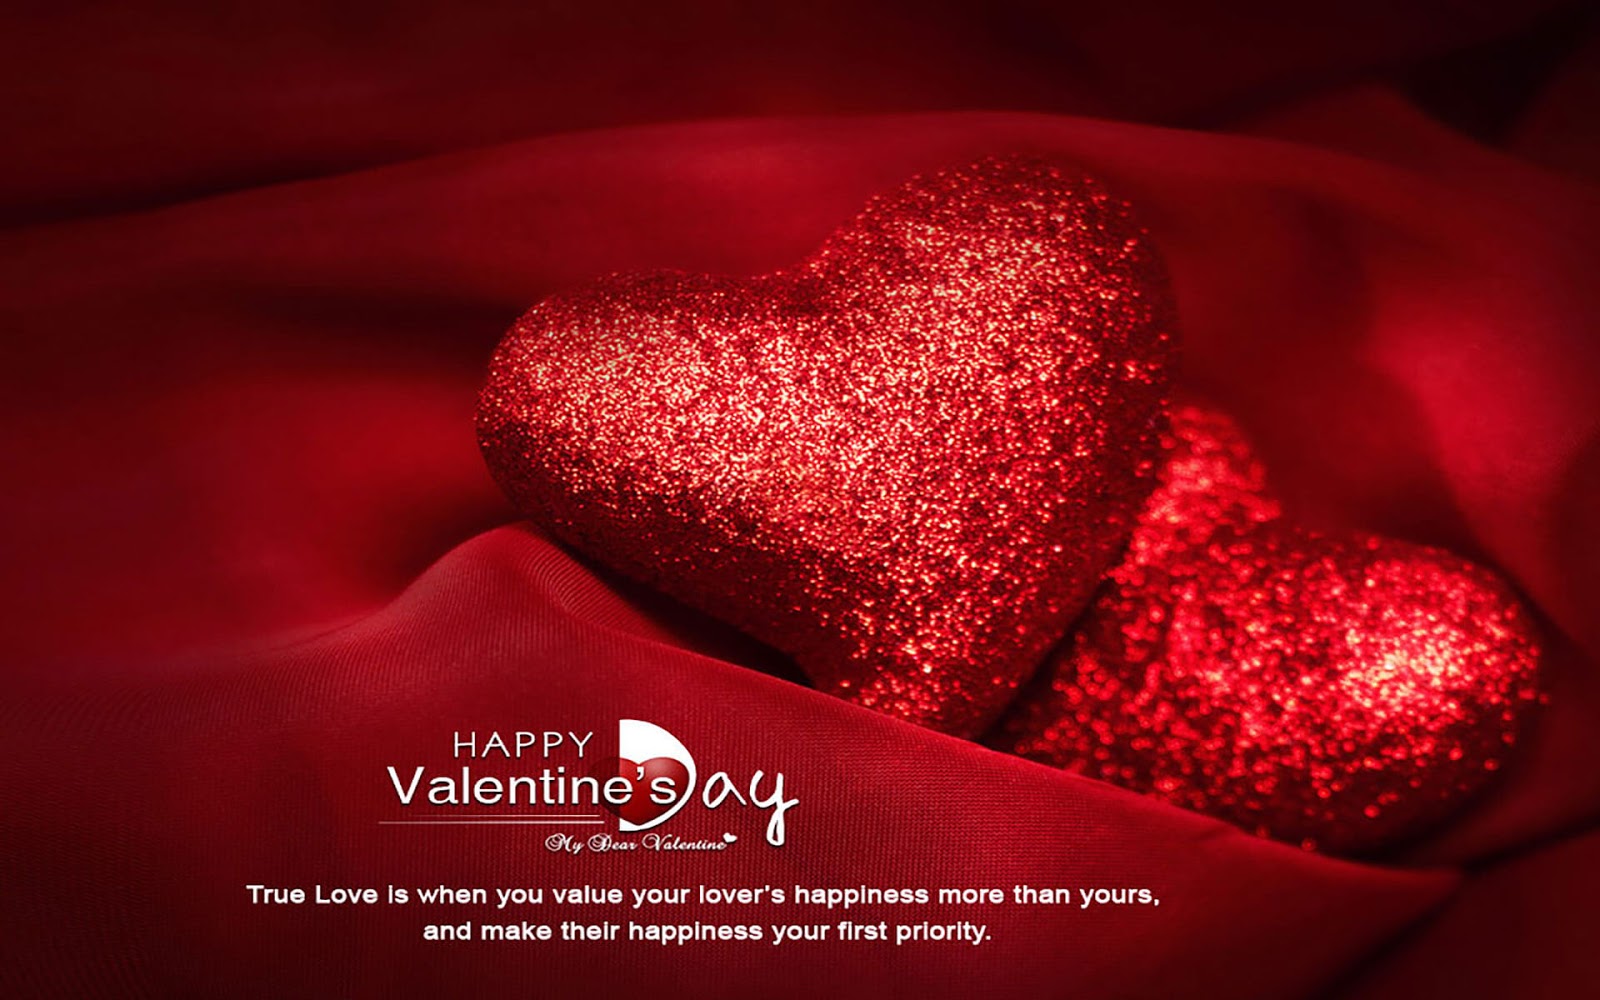 Happy Valentines day 2019 Quotes Wallpaper